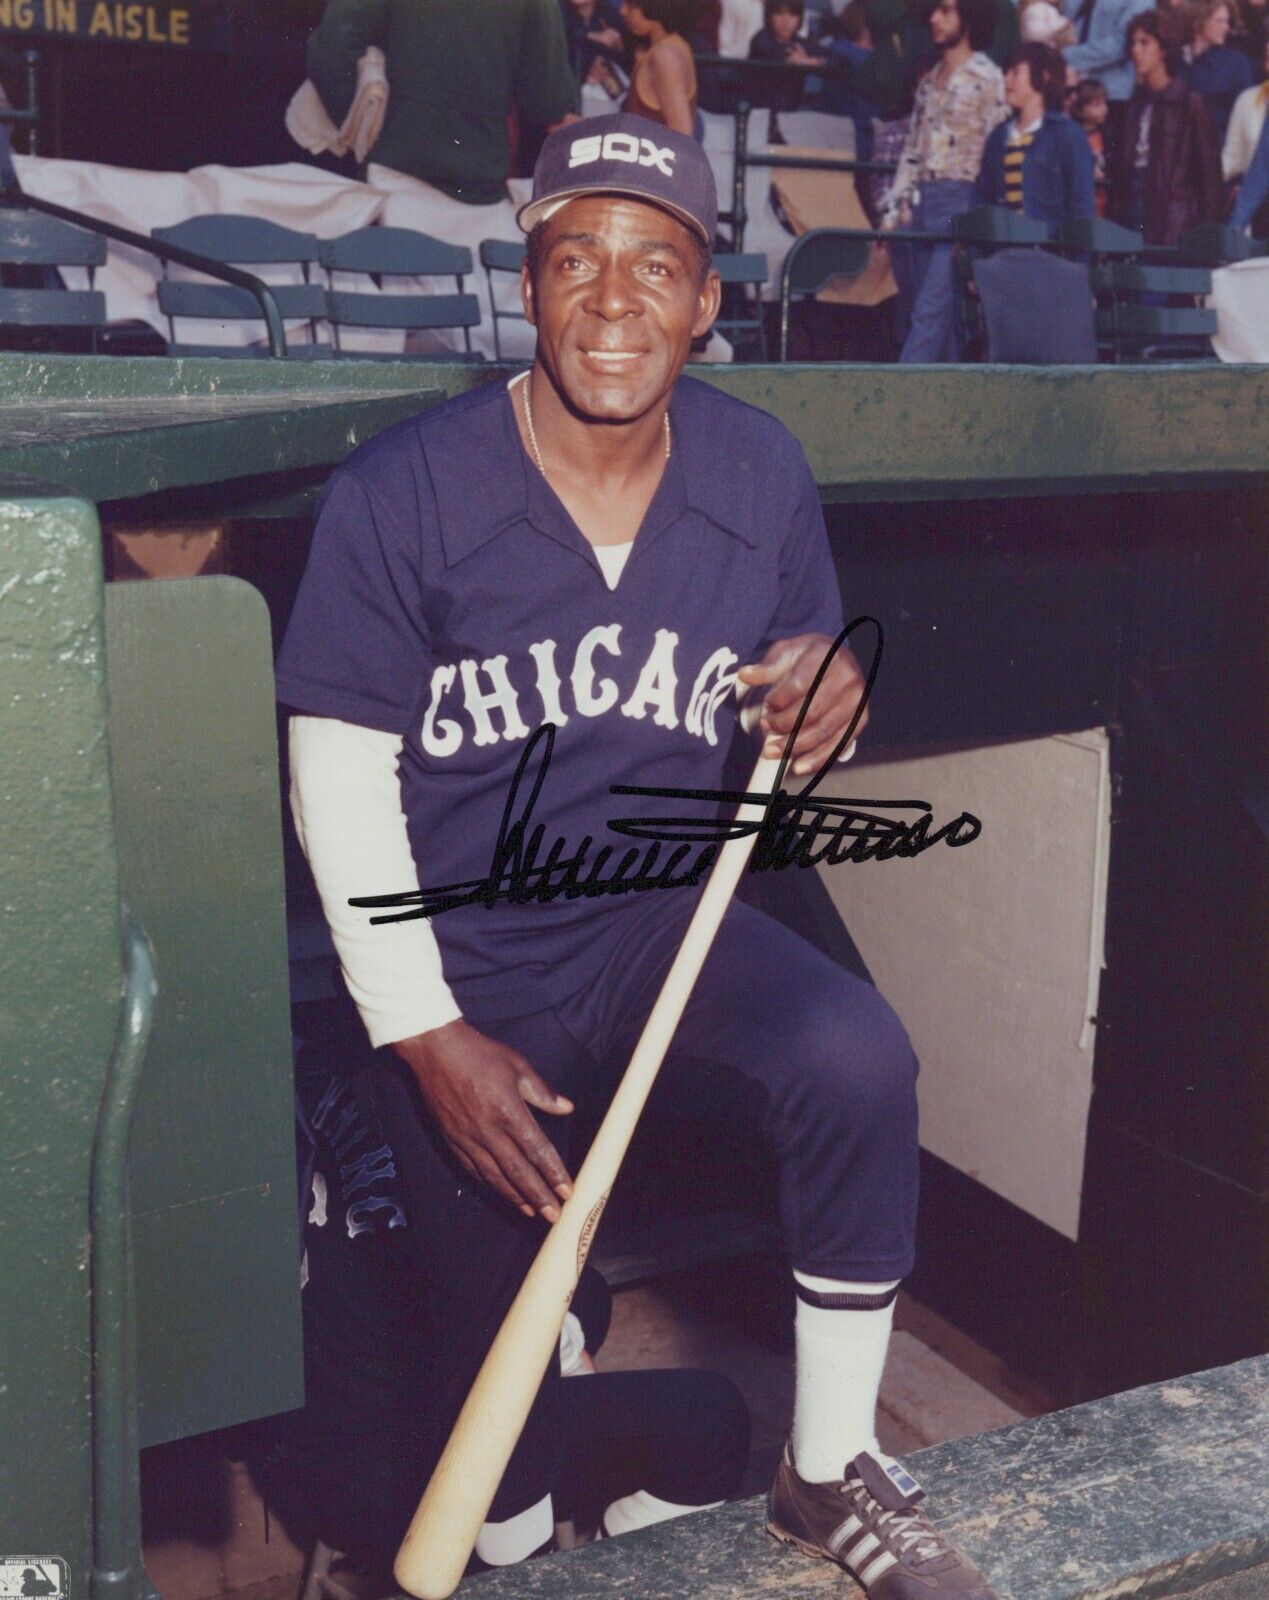 OUTSTANDING CUBAN MLB PLAYER HOF ORESTES MINOSO CHICAGO SIGN 1960s Photo Y 403